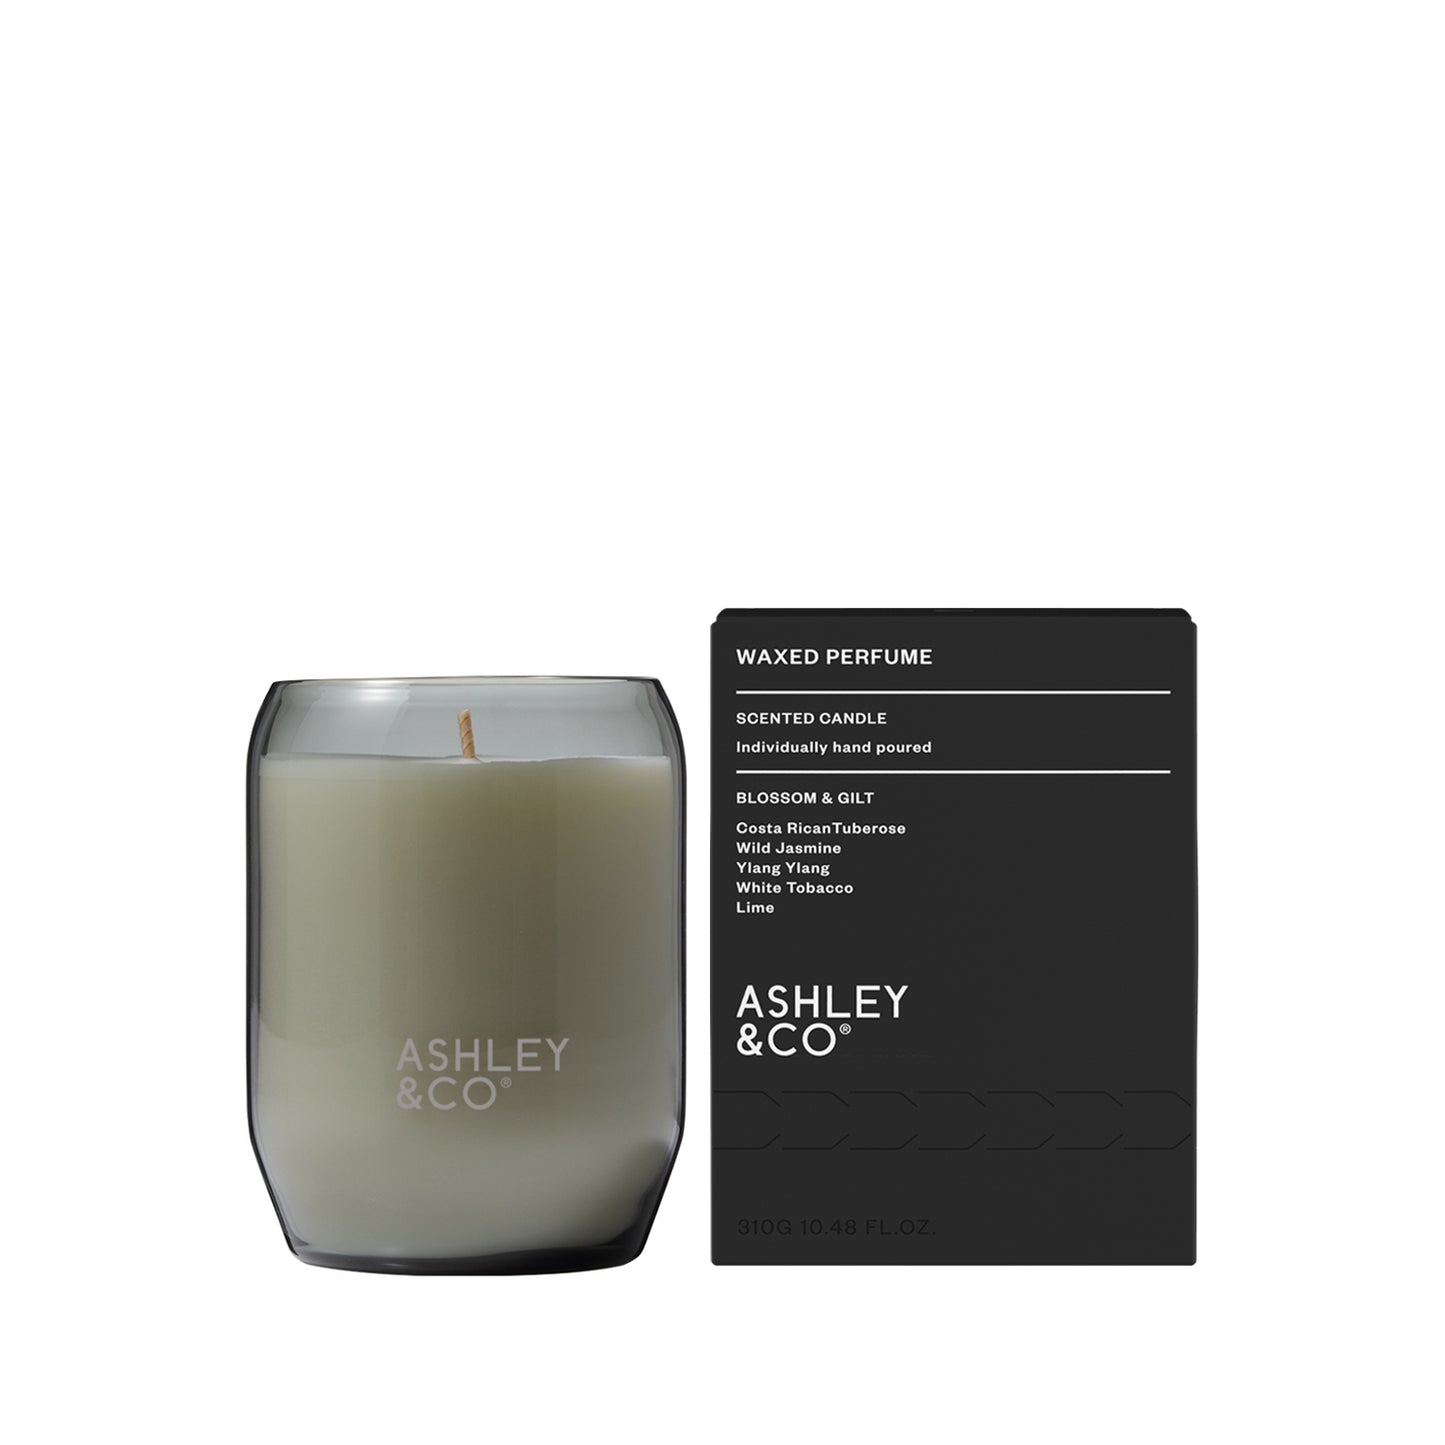 Waxed Perfume - Scented Candle - Blossom & Gilt